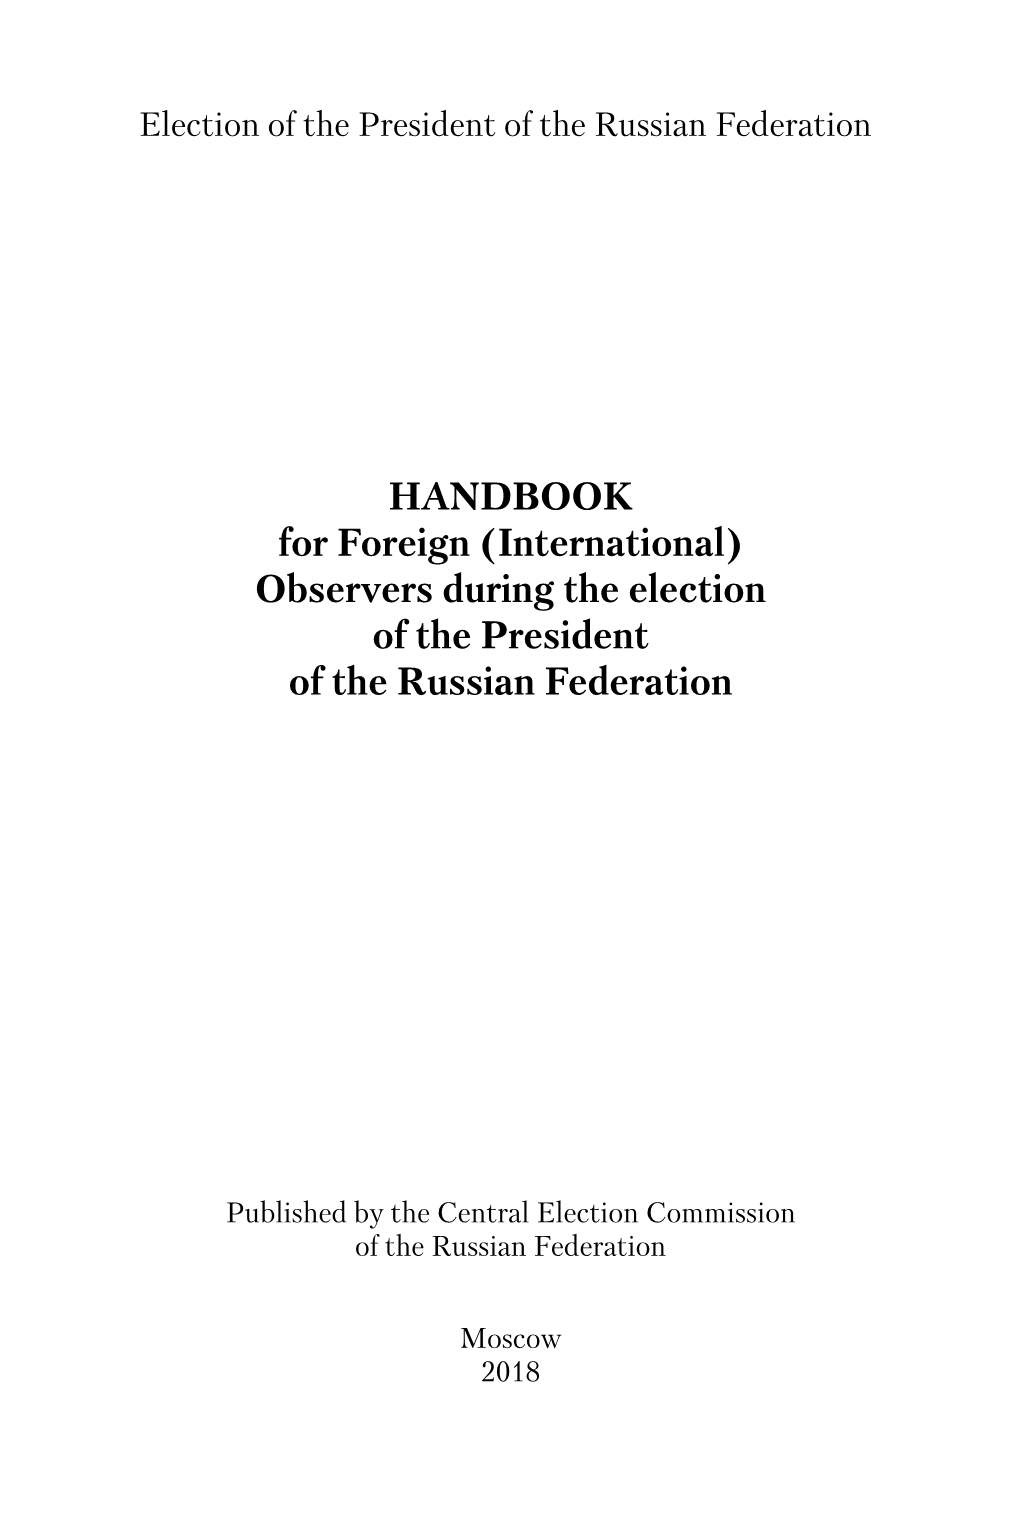 HANDBOOK for Foreign (International) Observers During the Election of the President of the Russian Federation